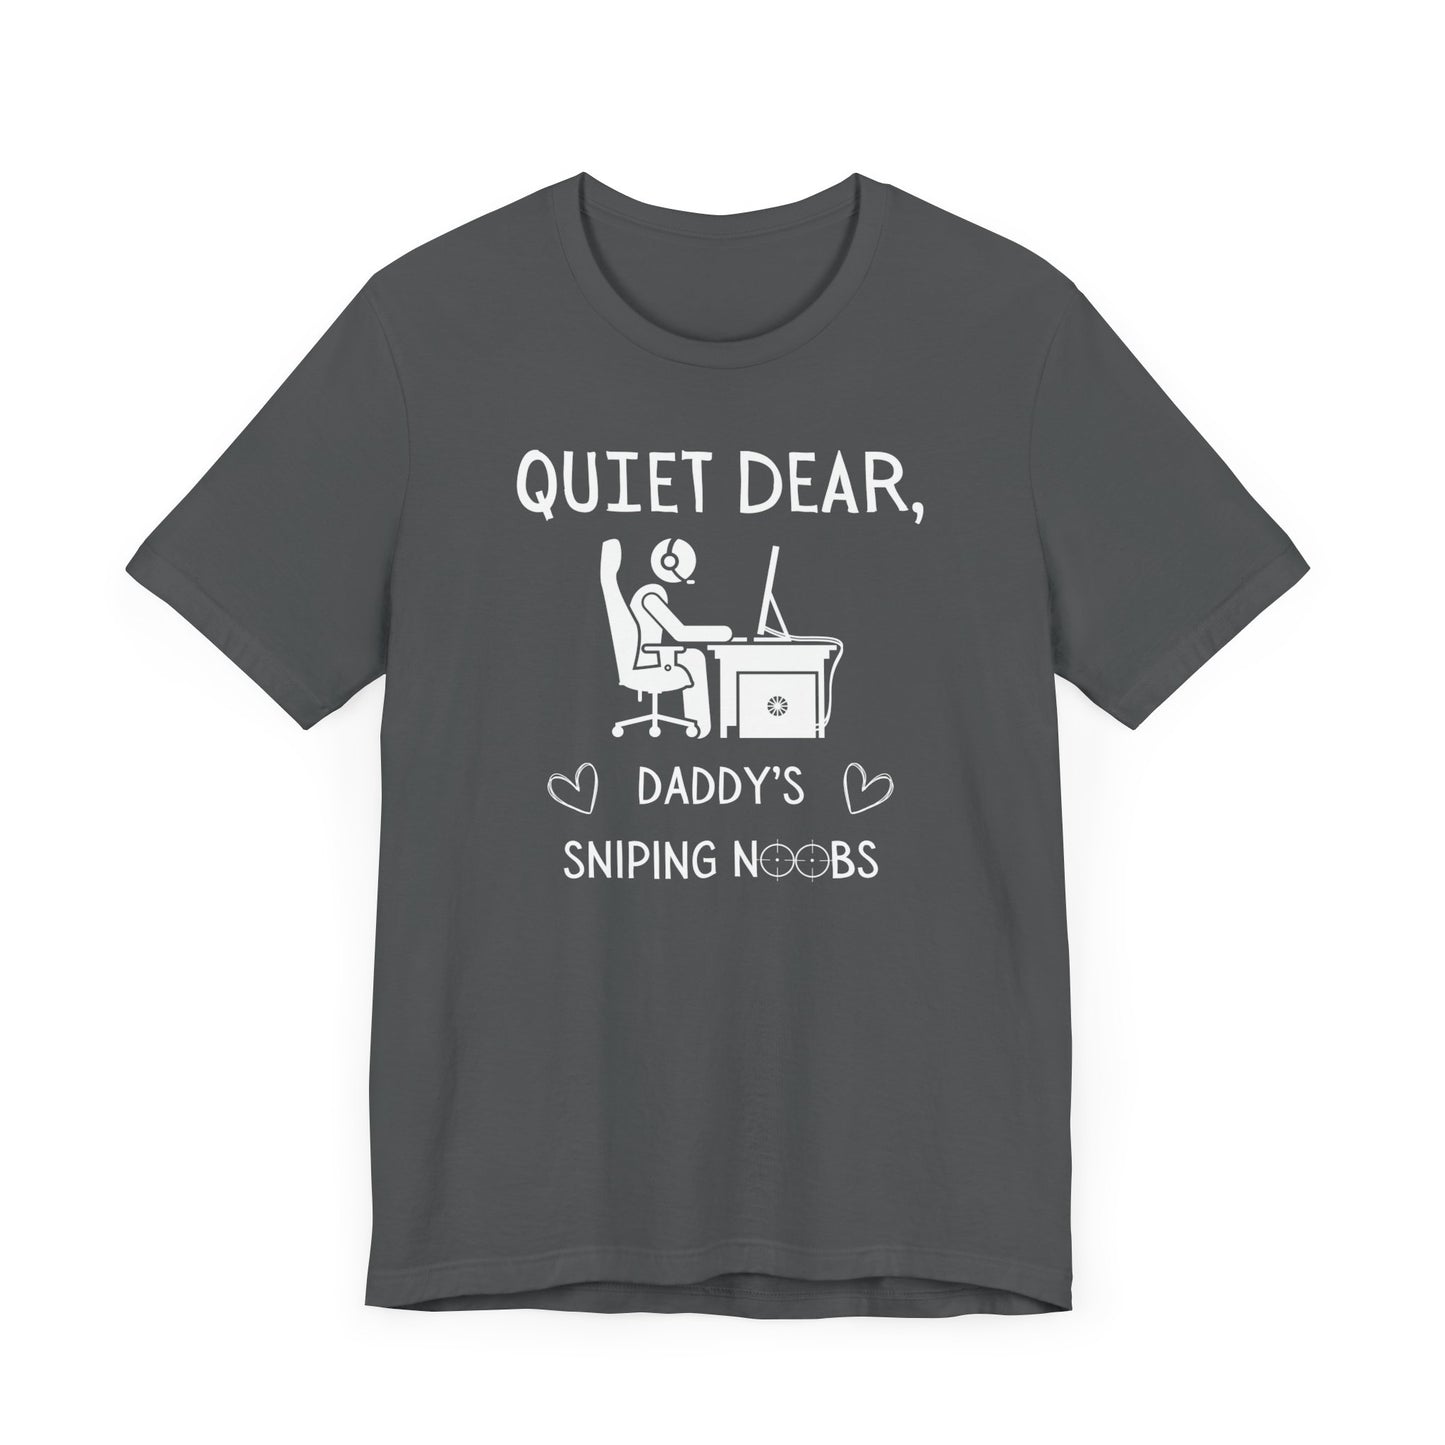 A flat image of a gray t-shirt that reads Quiet Dear, Daddy's Sniping Noobs in white text. The lower text is framed by two hearts, and the O's are in the shape of sniper scopes. In the center of the shirt is an image of a person at a desk with a gaming PC.